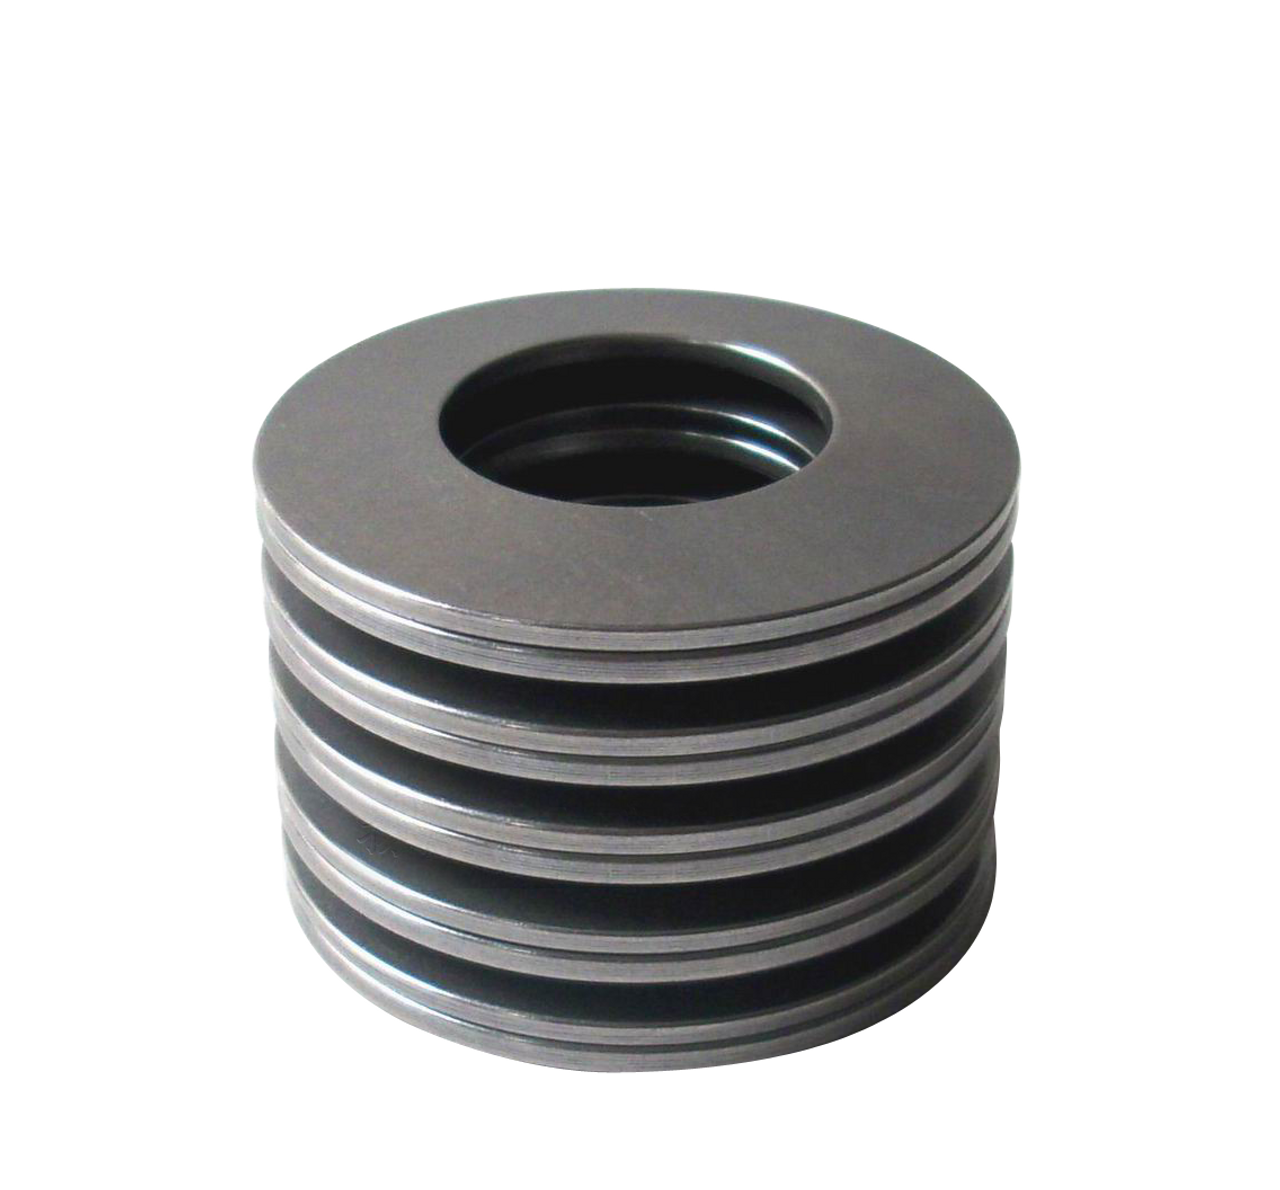 125mm Disc Spring (DIN 2093) Conical Washer  DS127.0-250-15